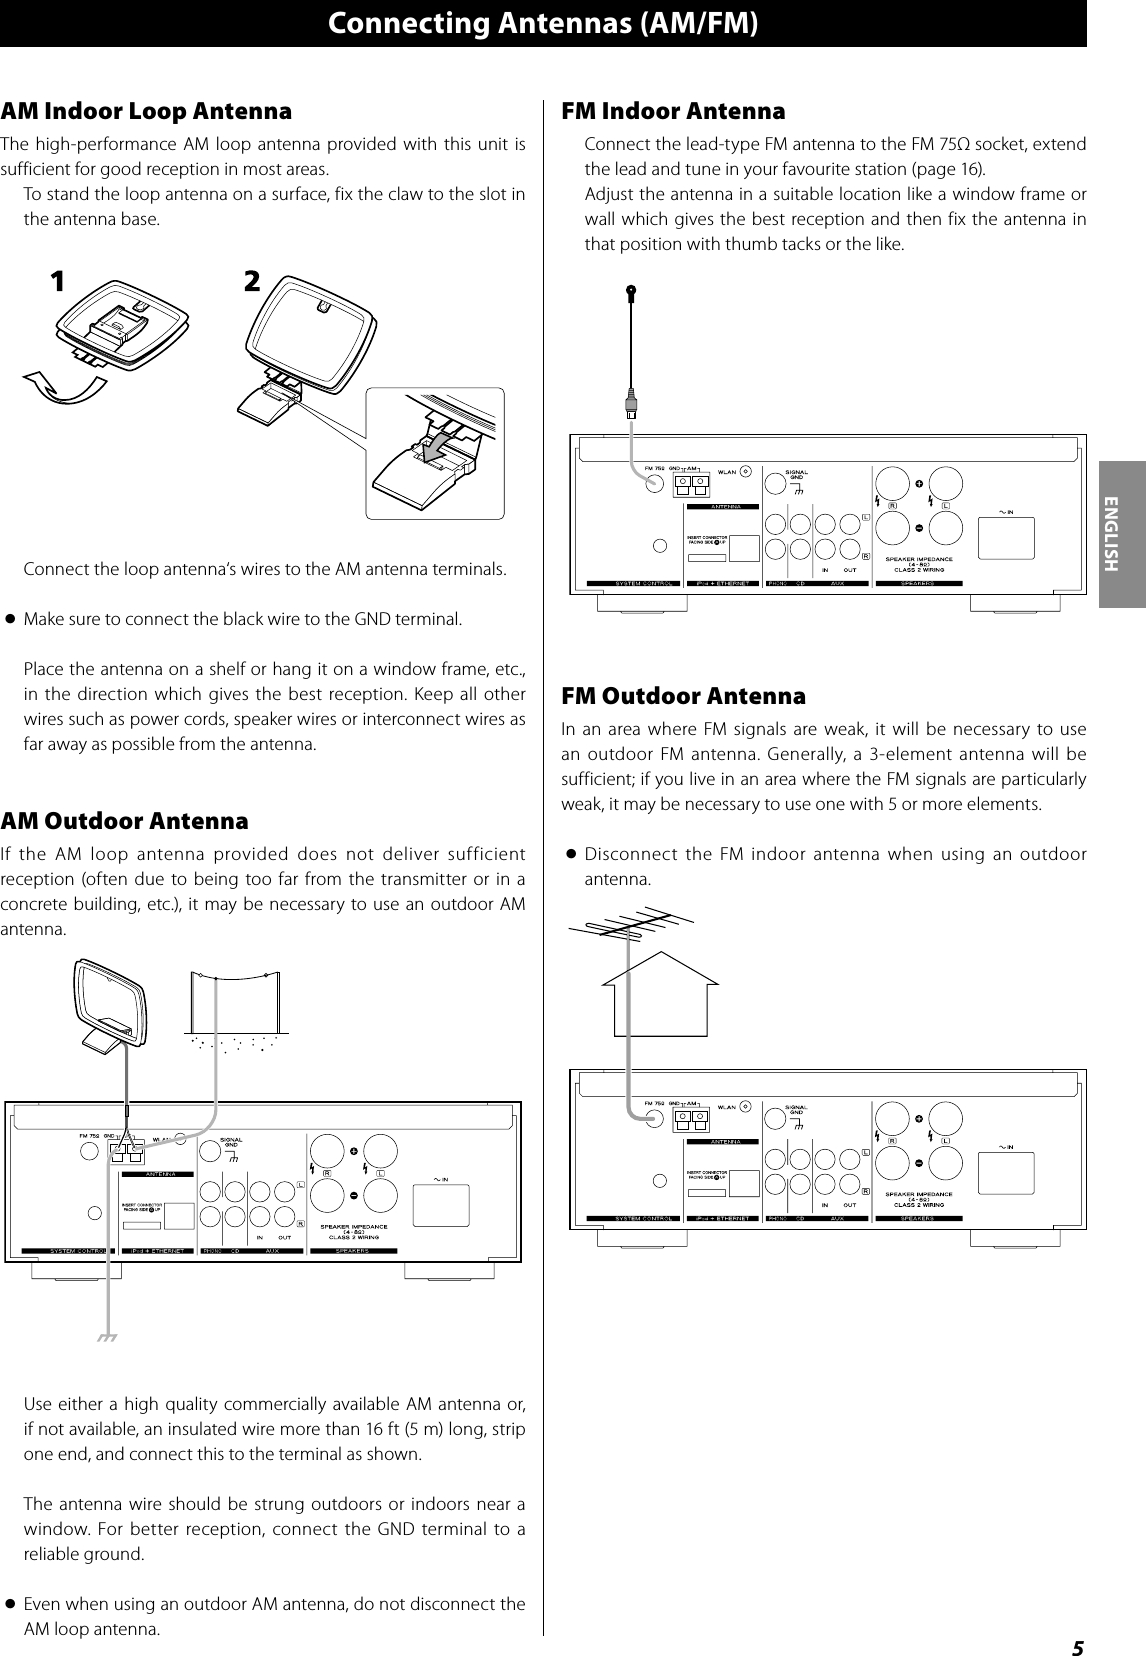 5ENGLISHFM Indoor AntennaConnect the lead-type FM antenna to the FM 75Ω socket, extend the lead and tune in your favourite station (page 16). Adjust the antenna in a suitable location like a window frame or wall which gives the best reception and then fix the antenna in that position with thumb tacks or the like.FM Outdoor AntennaIn an area where FM signals are weak, it will be necessary to use an outdoor FM antenna. Generally, a 3-element antenna will be sufficient; if you live in an area where the FM signals are particularly weak, it may be necessary to use one with 5 or more elements.&lt;  Disconnect  the  FM  indoor  antenna  when  using  an  outdoor antenna.Connecting Antennas (AM/FM)AM Indoor Loop AntennaThe  high-performance AM  loop antenna provided with this  unit is sufficient for good reception in most areas.To stand the loop antenna on a surface, fix the claw to the slot in the antenna base.Connect the loop antenna‘s wires to the AM antenna terminals.&lt;  Make sure to connect the black wire to the GND terminal.Place the antenna on a shelf or hang it on a window frame, etc., in the direction  which  gives  the  best reception.  Keep all other wires such as power cords, speaker wires or interconnect wires as far away as possible from the antenna.AM Outdoor AntennaIf  the  AM  loop  antenna  provided  does  not  deliver  sufficient reception  (often  due to being too far from  the  transmitter or  in a concrete building, etc.), it may be necessary to use an outdoor AM antenna.Use  either  a high quality commercially available  AM  antenna or, if not available, an insulated wire more than 16 ft (5 m) long, strip one end, and connect this to the terminal as shown.The  antenna wire should be strung outdoors or  indoors near a window. For  better  reception,  connect  the  GND terminal  to  a reliable ground.&lt;  Even when using an outdoor AM antenna, do not disconnect the AM loop antenna.